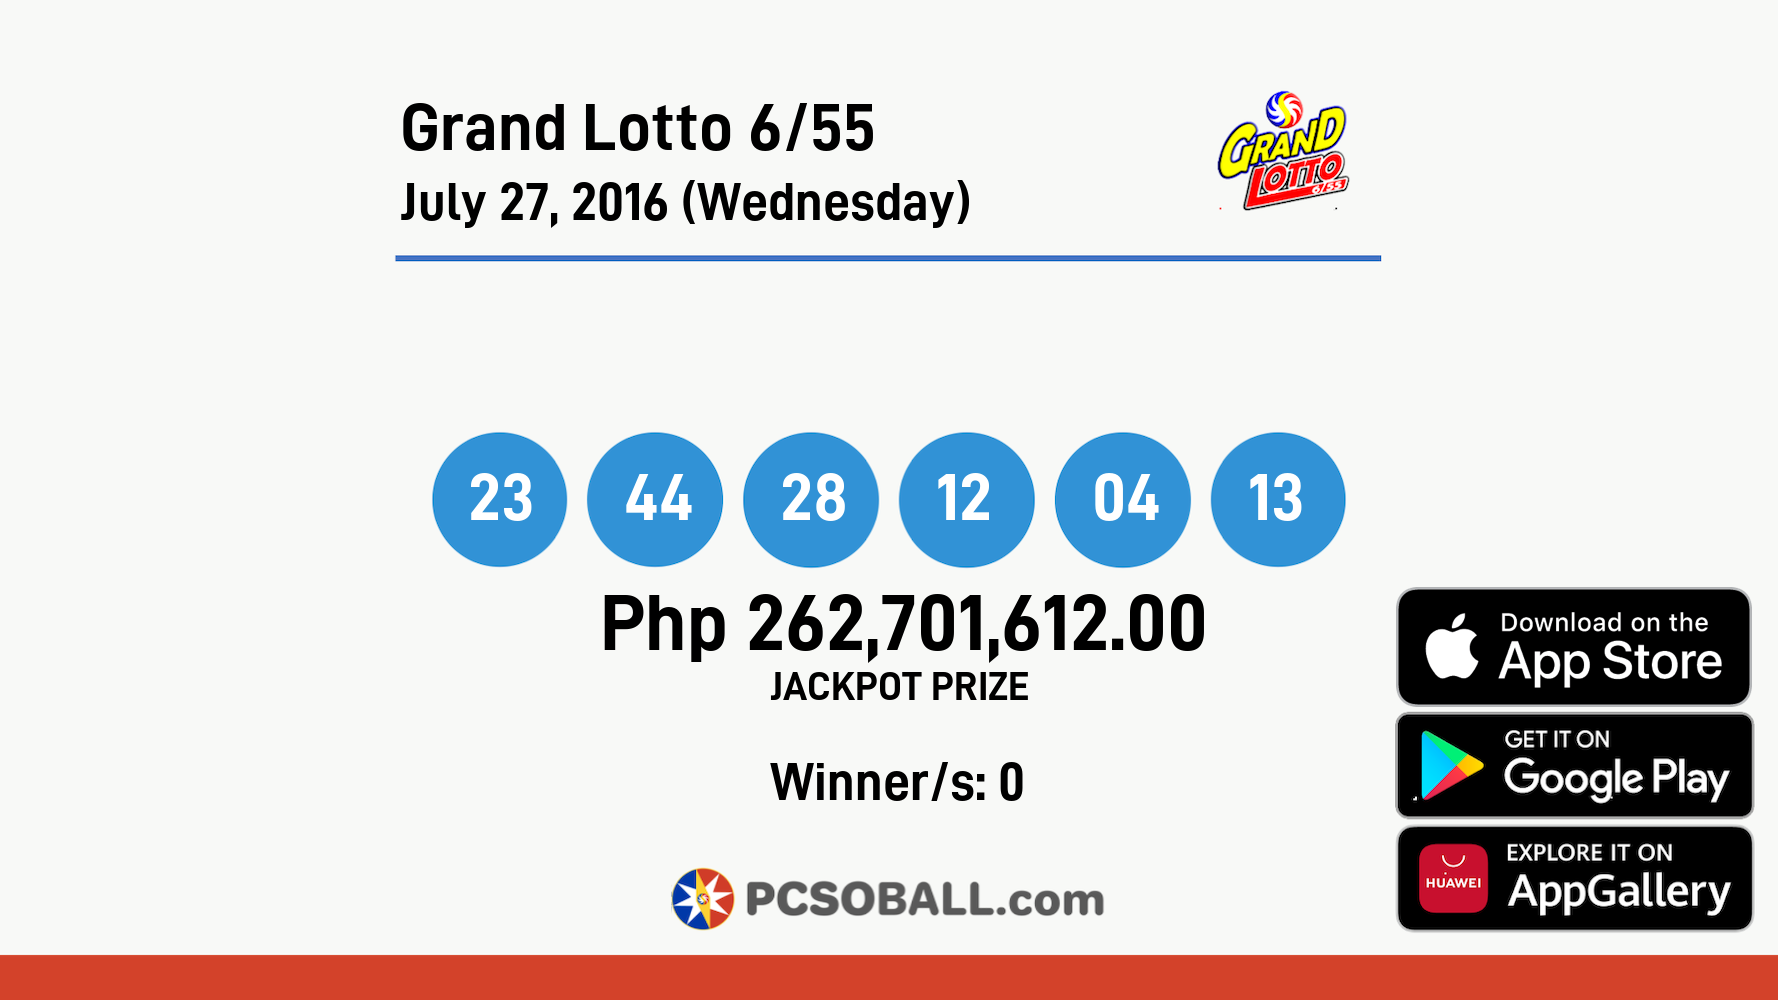 Grand Lotto 6/55 July 27, 2016 (Wednesday) Result